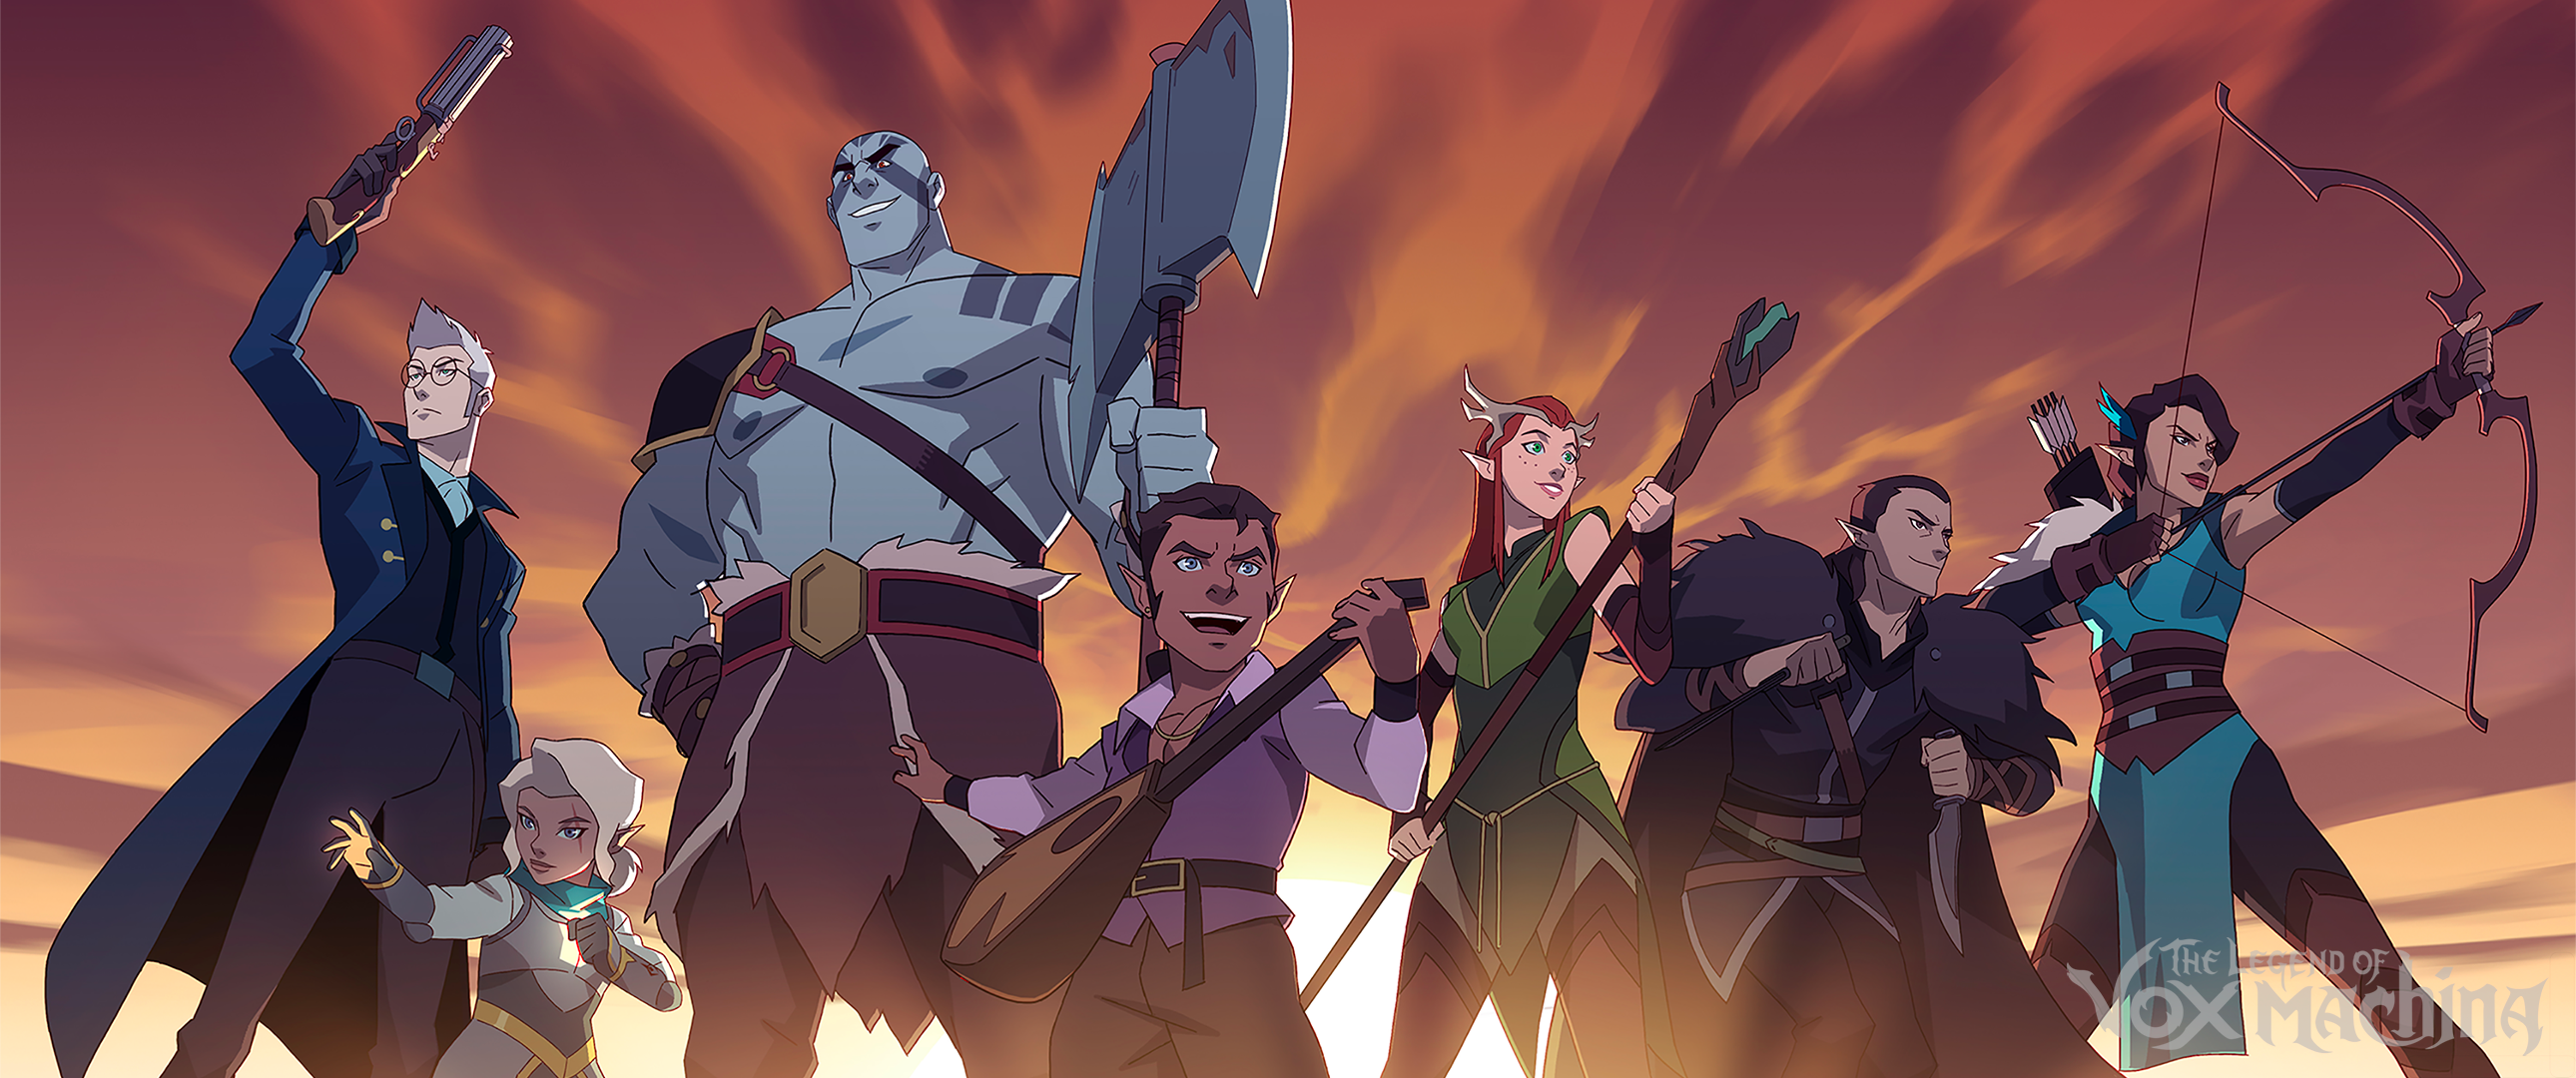 Critical Role The Legend Of Vox Machina Exandria Unlimited TV Series 2580x1080